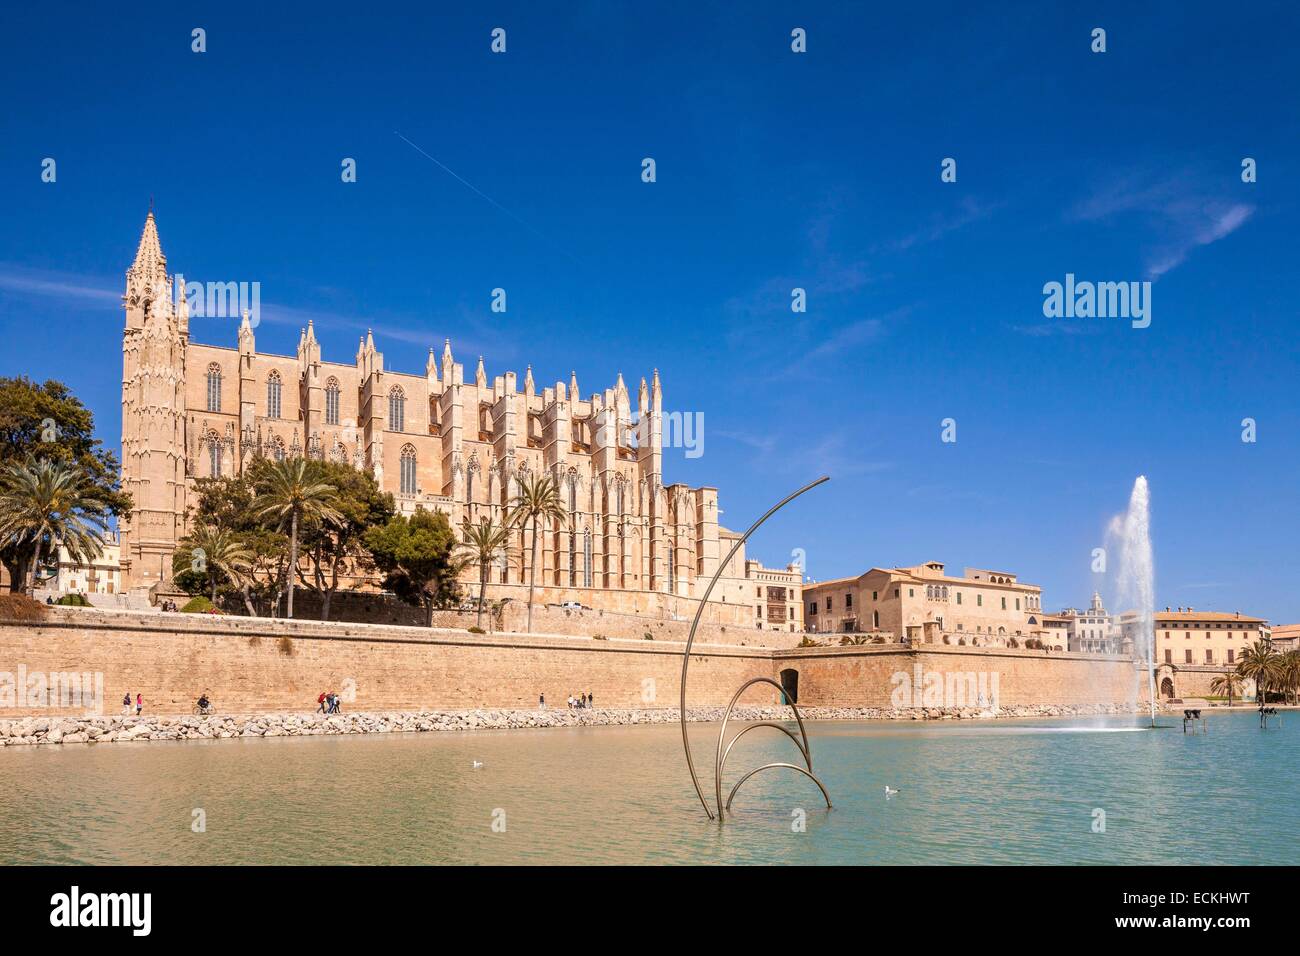 Spain, Balearic Islands, Majorca, Palma de Mallorca, Cathedral (La Seu) built between 1229 and 1601 and of Catalan Gothic style with a modern sculpture by Andreu Alfaro Stock Photo